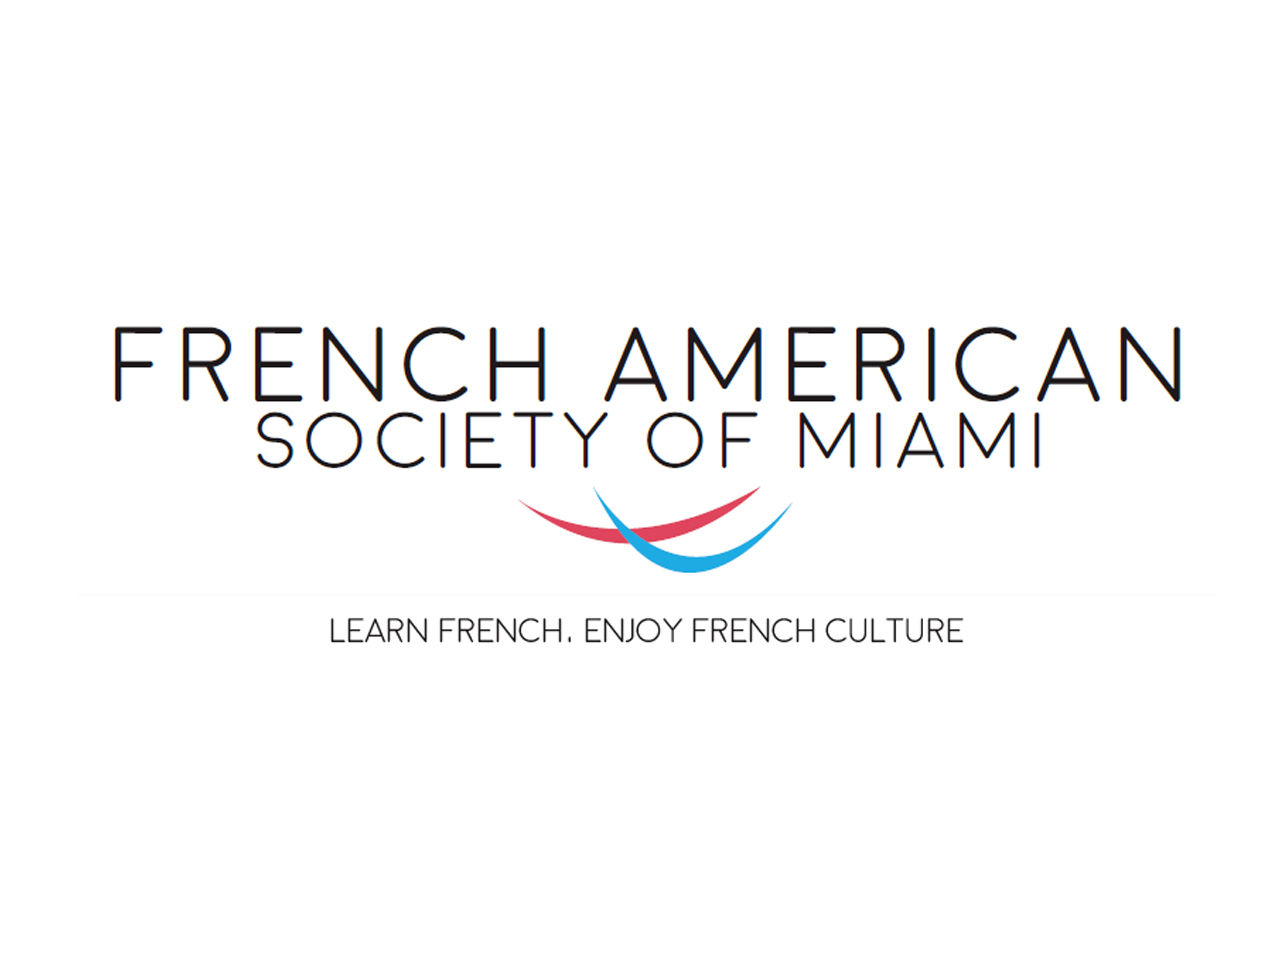 French American Society of Miami